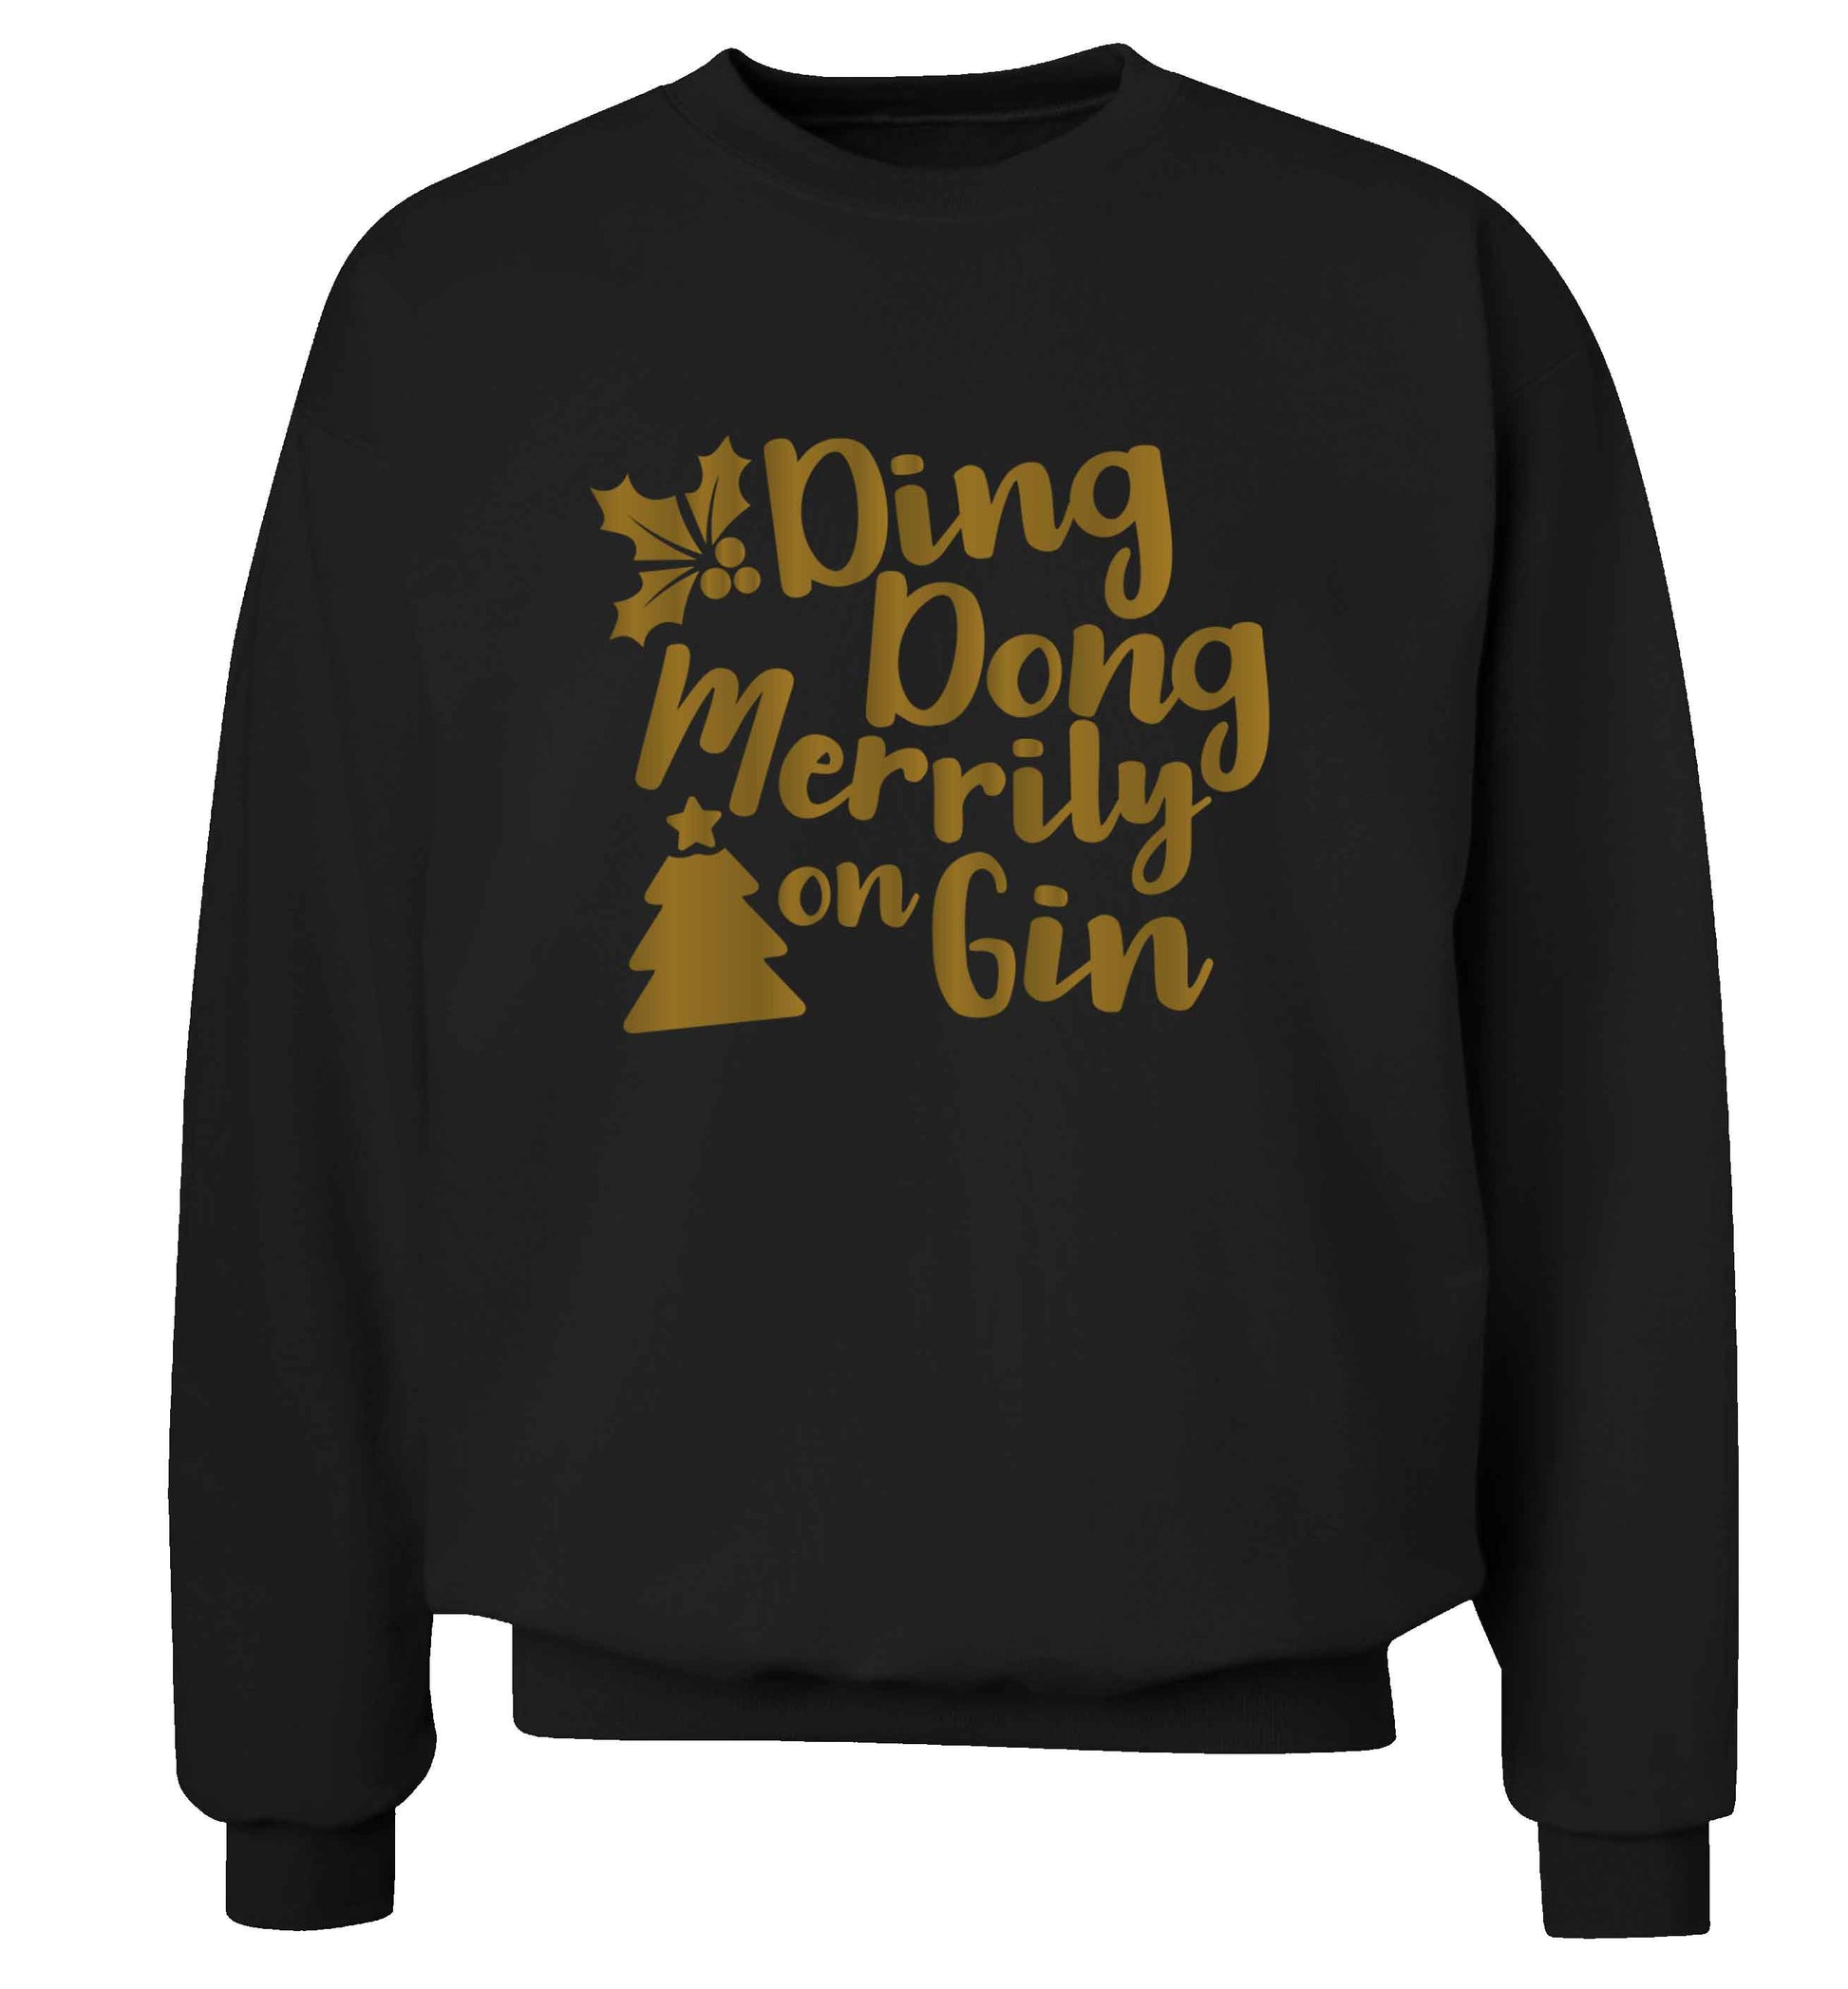 Ding dong merrily on gin Adult's unisex black Sweater 2XL